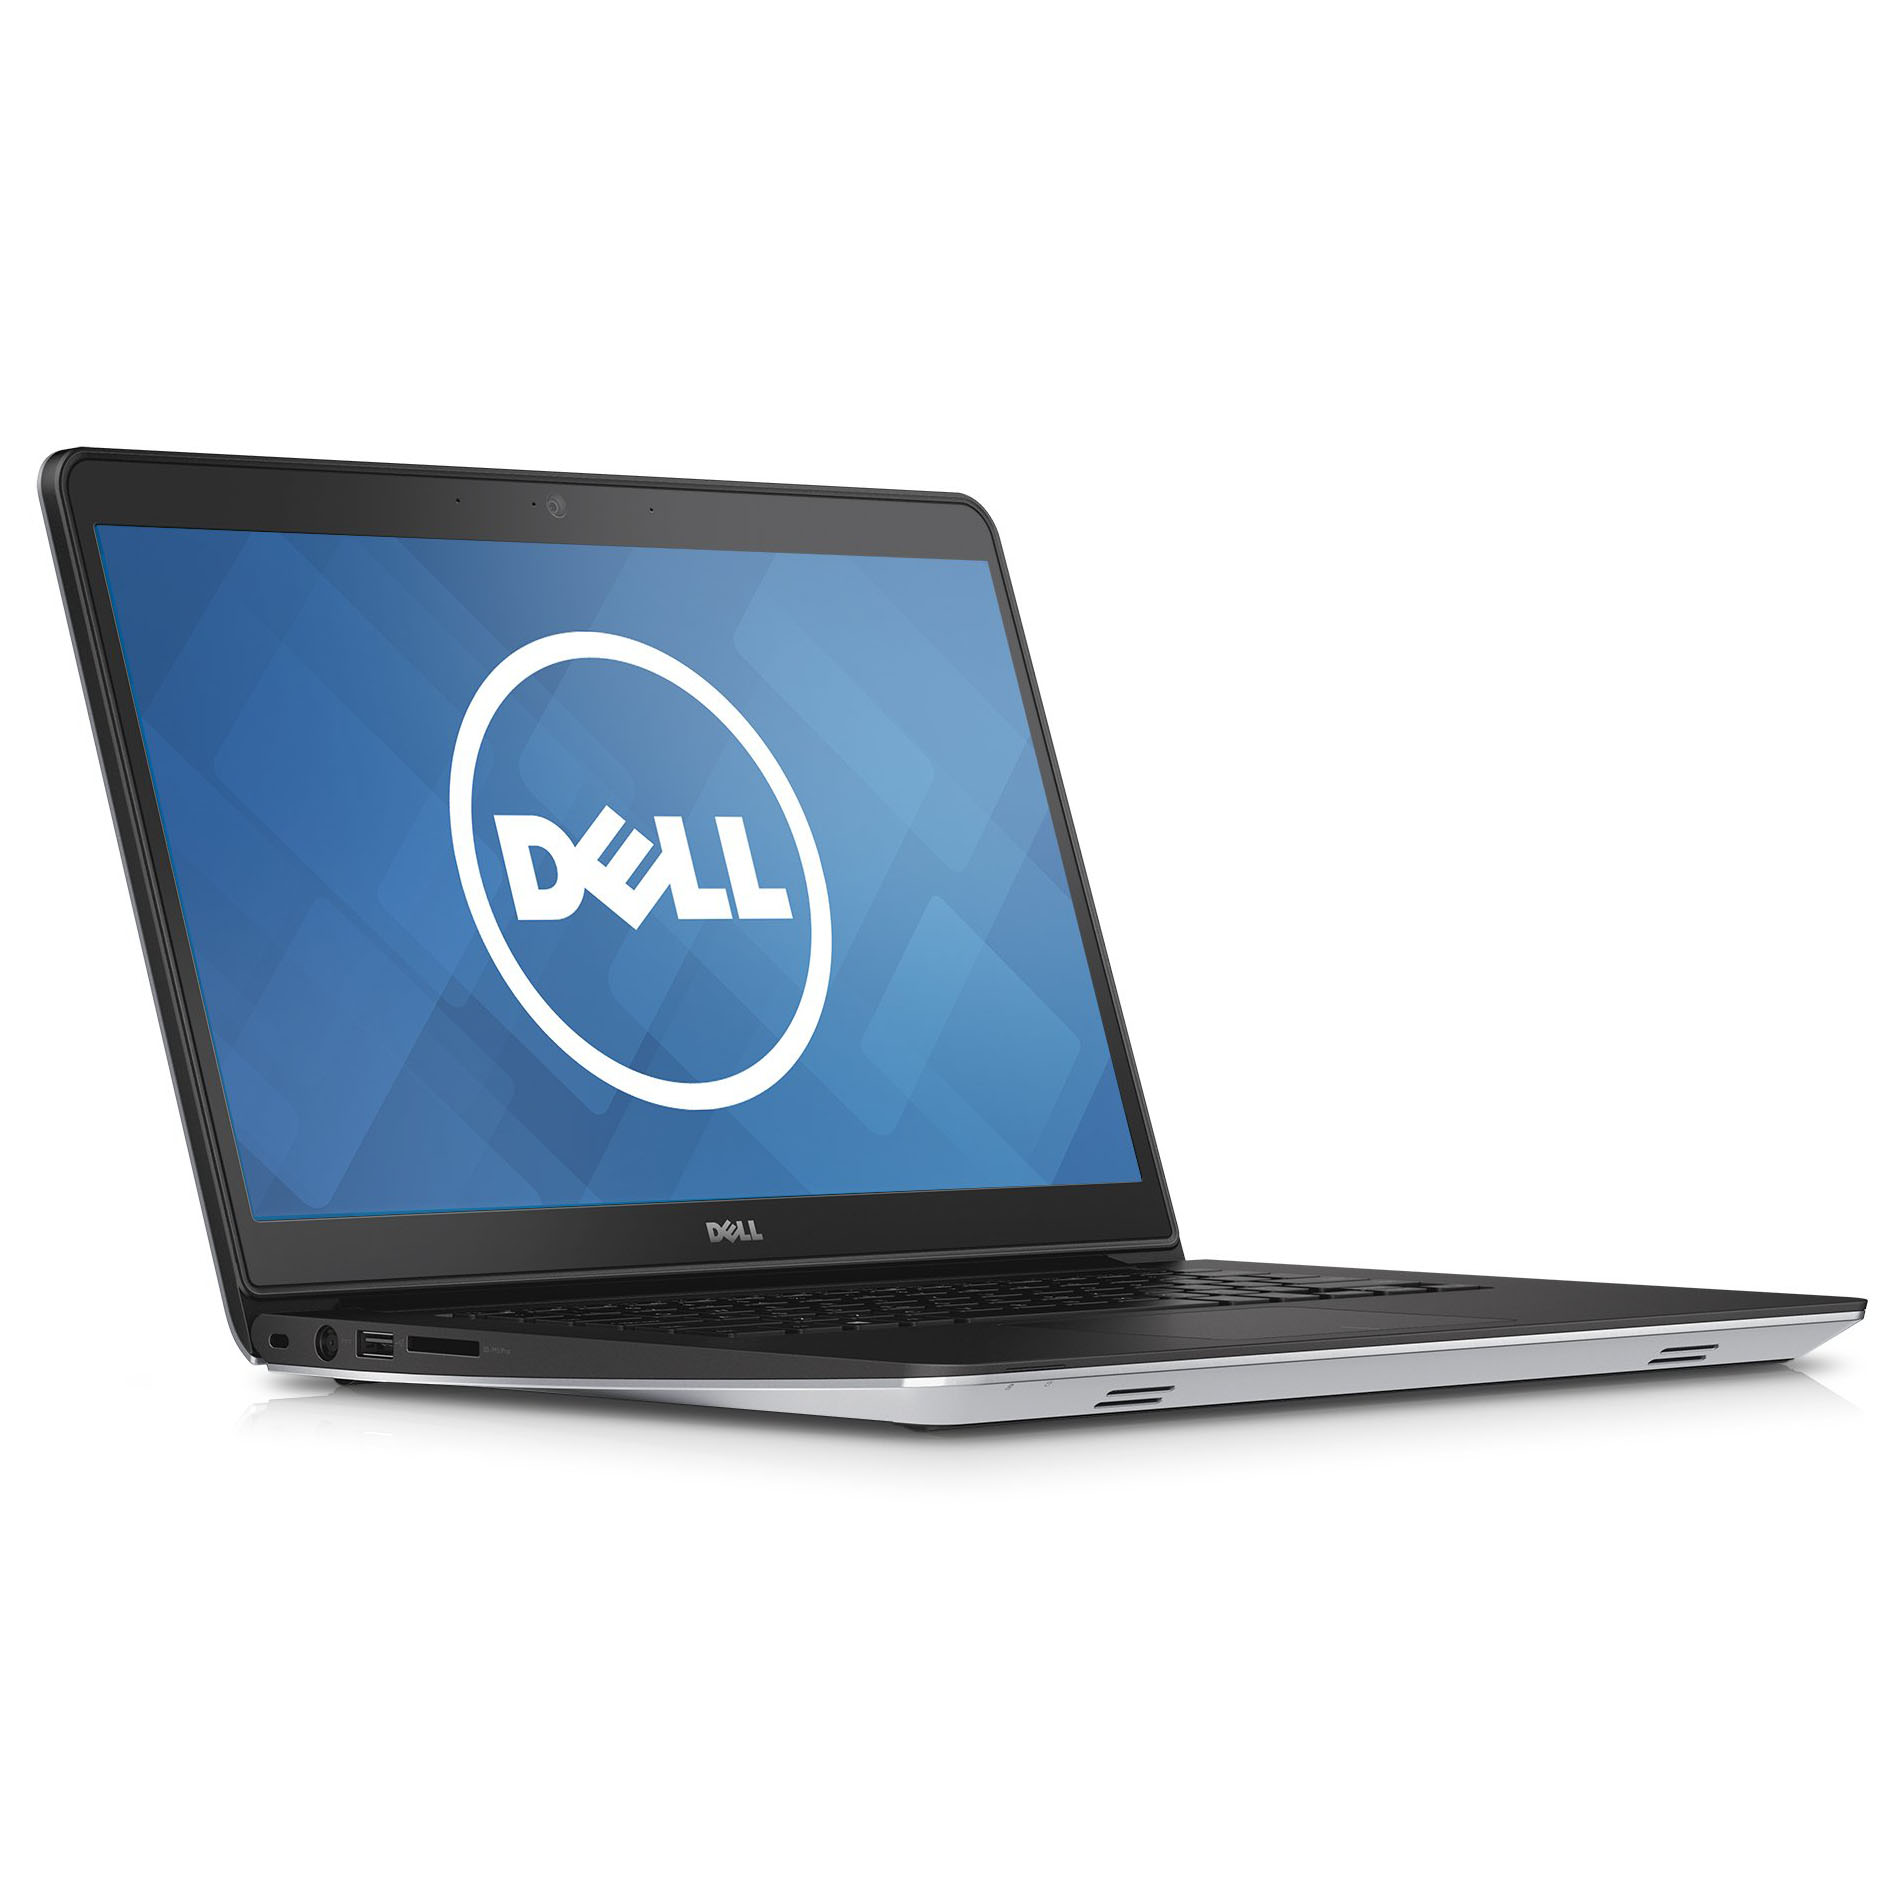 Dell Inspiron 14 5448 Notebook